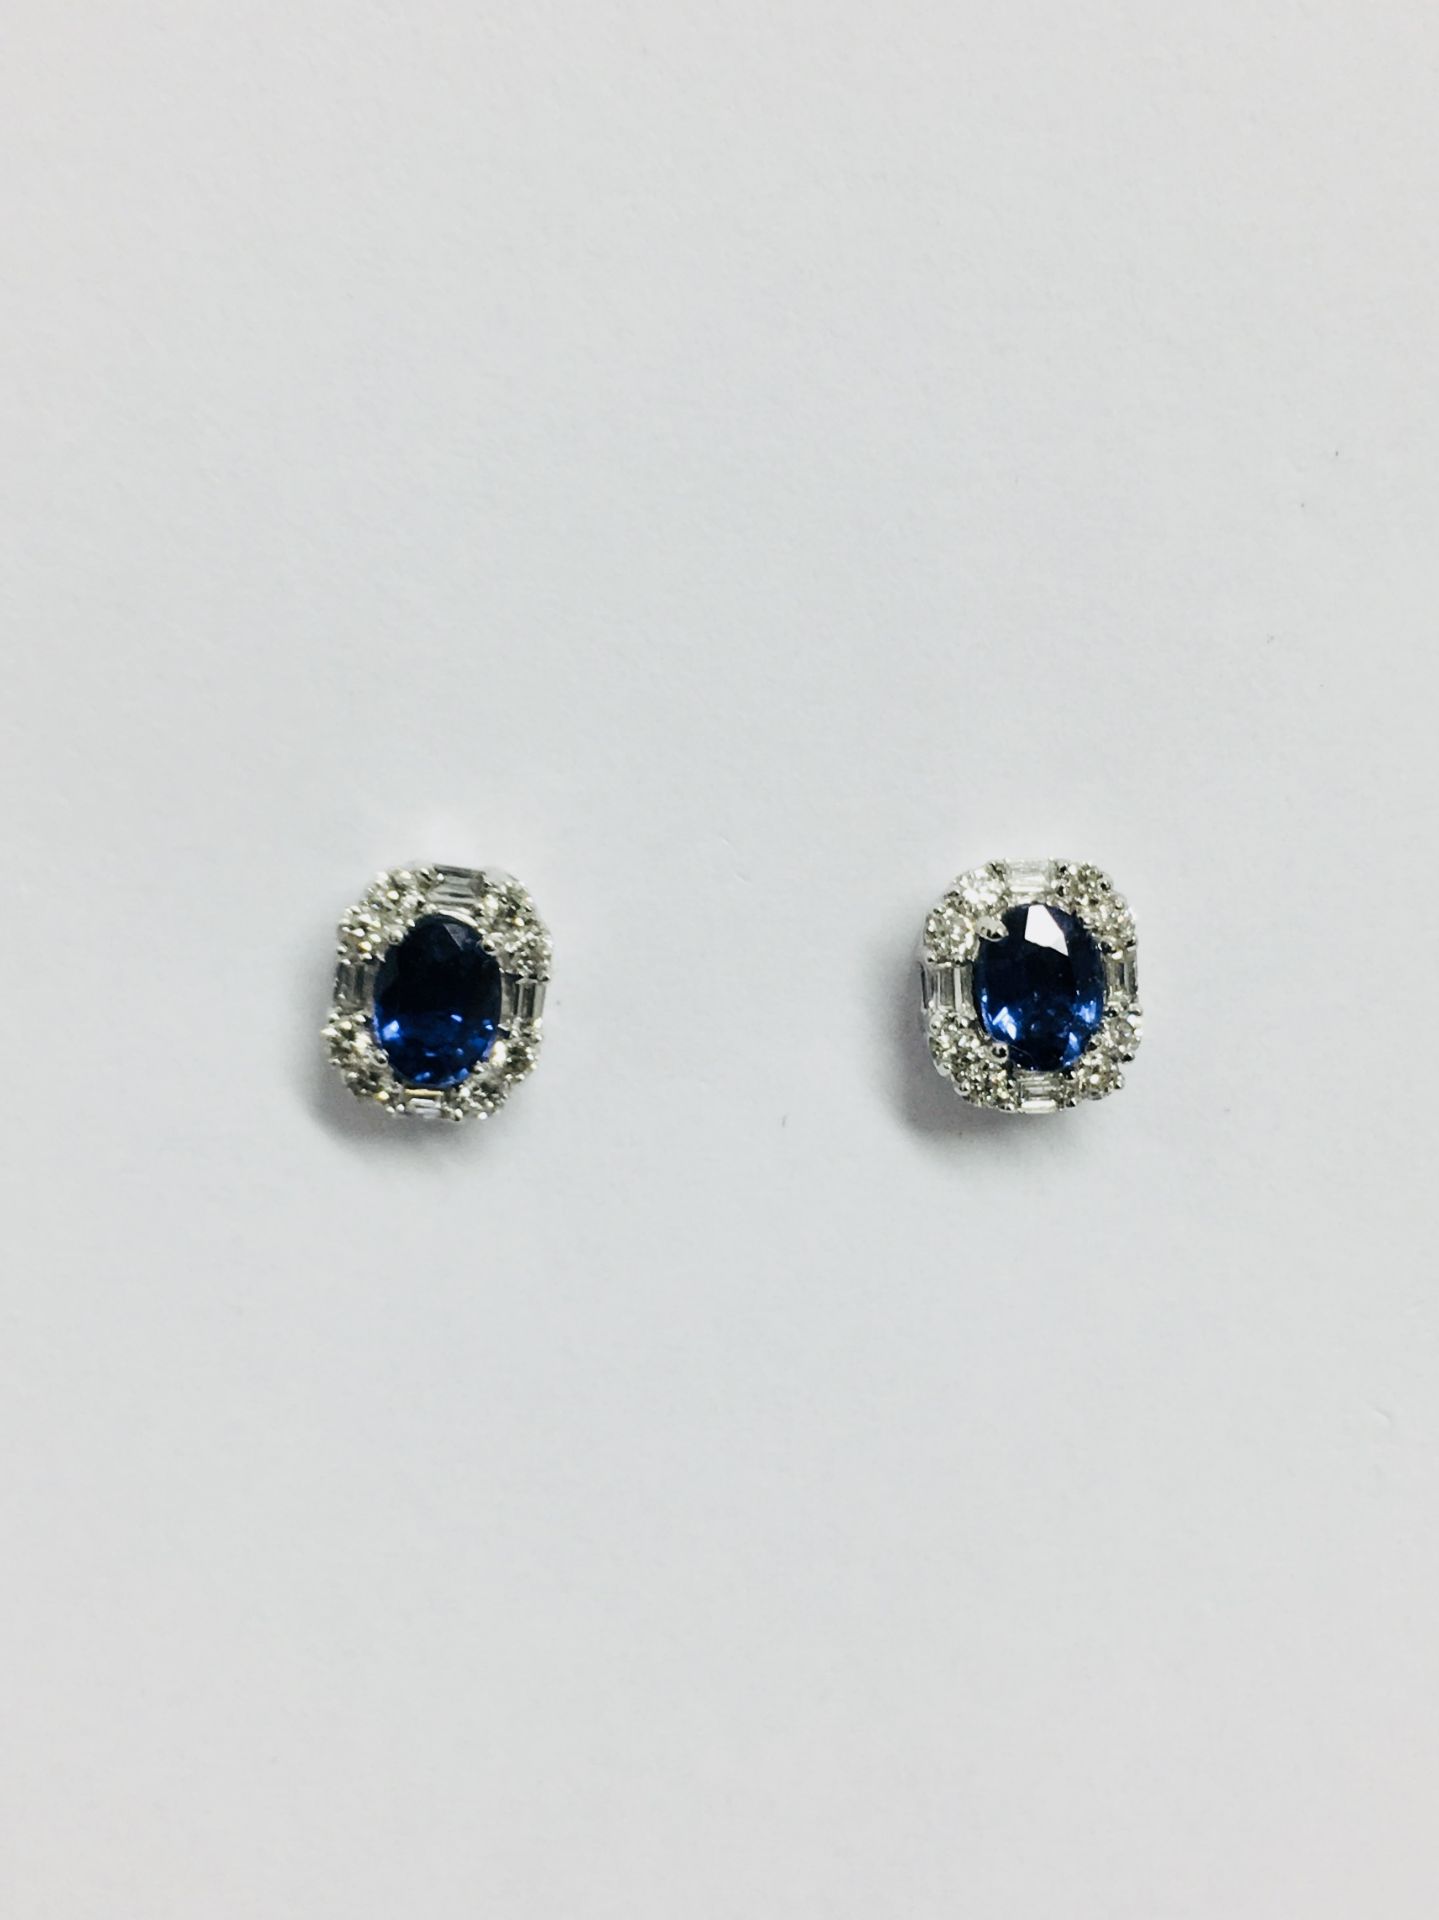 18ct white gold Sapphire diamond stud earrings,0.50ct natural sapphire,0.17ct brilliant and baguette - Image 2 of 2